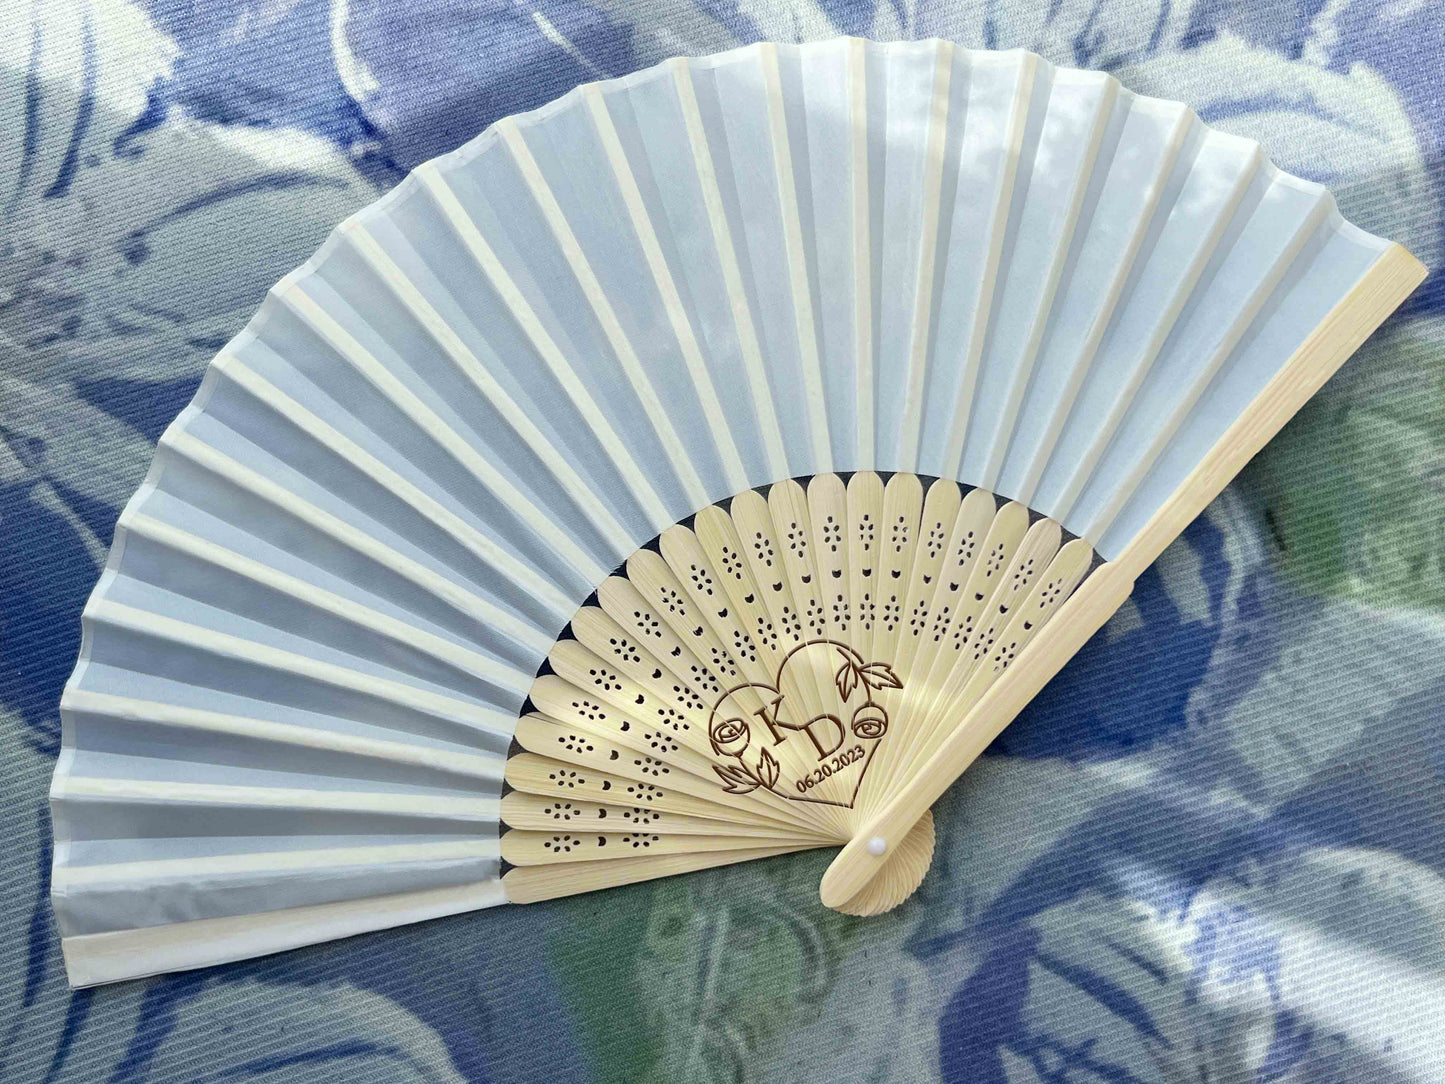 Personalized Custom Fabric Fans Gifts Engraved Folding Hand Fans Wedding Party Favors Gifts for Guests in Bulk